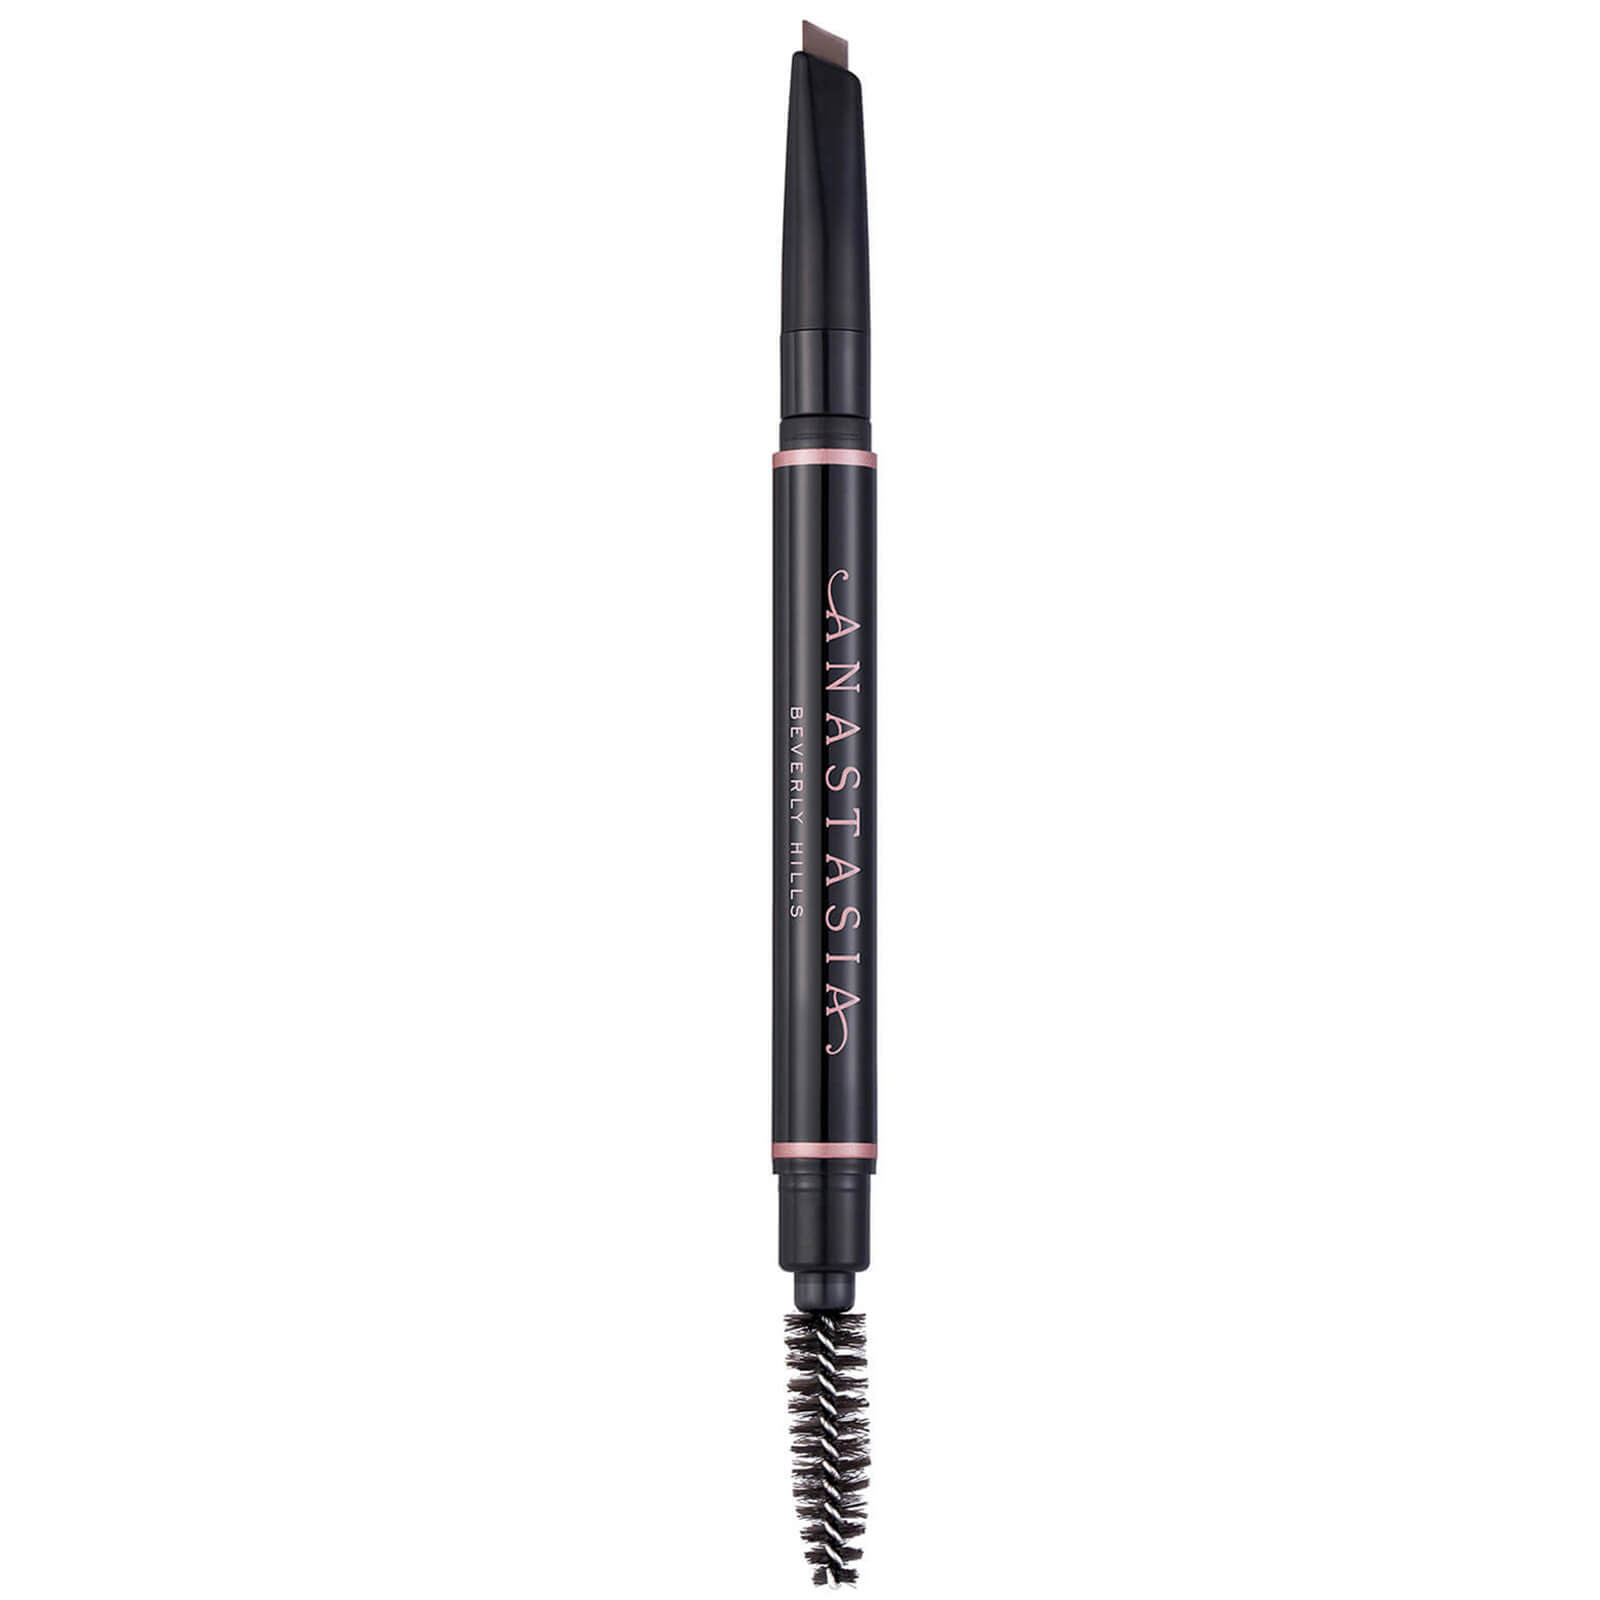 Anastasia Beverly Hills Brow Definer 0.2g (Various Shades) - Taupe